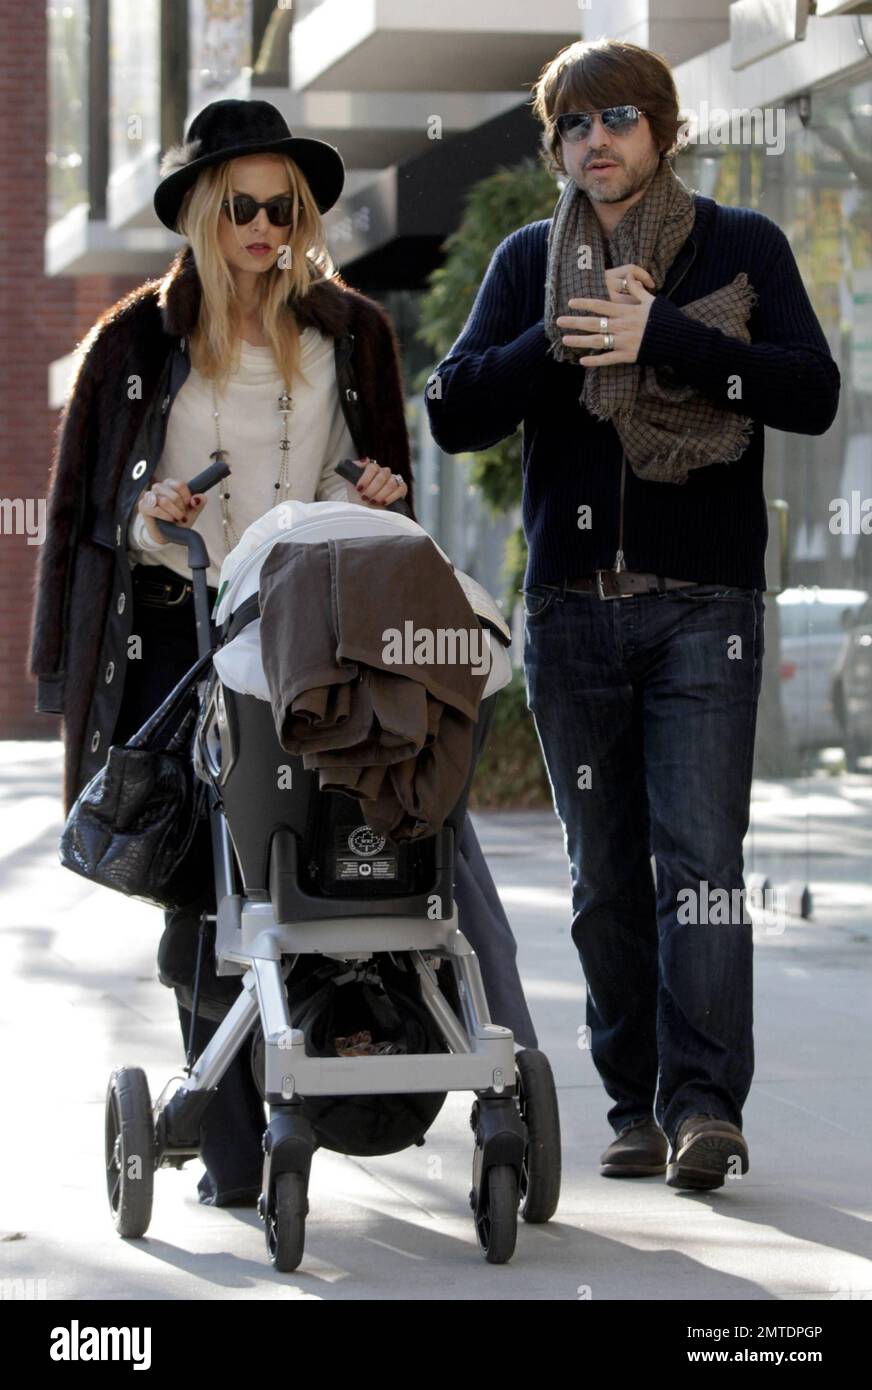 EXCLUSIVE!! Stylist to the stars Rachel Zoe and husband Rodger Berman take their 8 month old baby, Skylar, out for a stroll in Beverly Hills. The 40 year old stylish mother was seen pushing a stroller carrying baby Skylar while wearing a black hat, brown furry jacket, tan top with blue jeans and accessorized with a Chanel necklace and dark sunglasses. The stylist who counts Cameron Diaz, Jennifer Garner and Kate Hudson among her A-list clientele recently admitted that her cute son has become her favorite person to style for because he as 'no opinion' on the hundred of designer outfits she gets Stock Photo